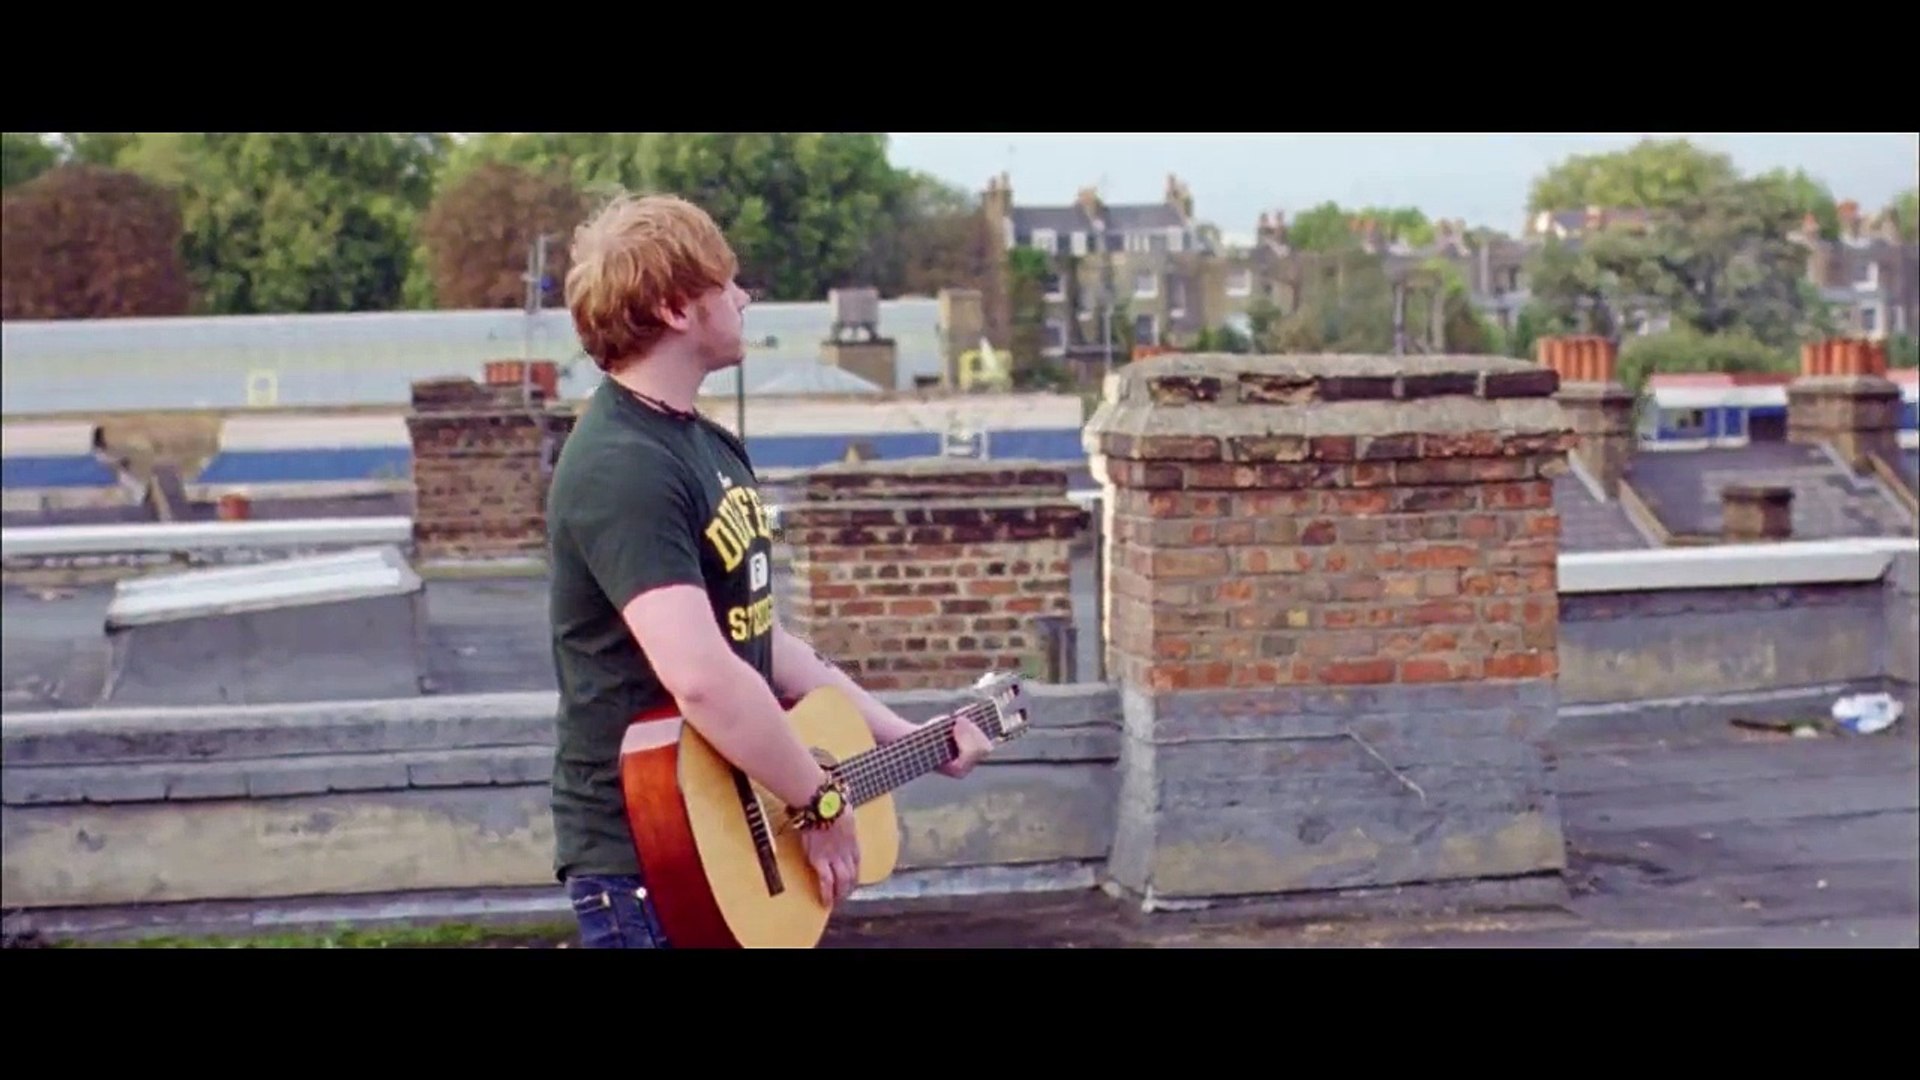 Ed Sheeran Lego House [Official Video] - Dailymotion Video